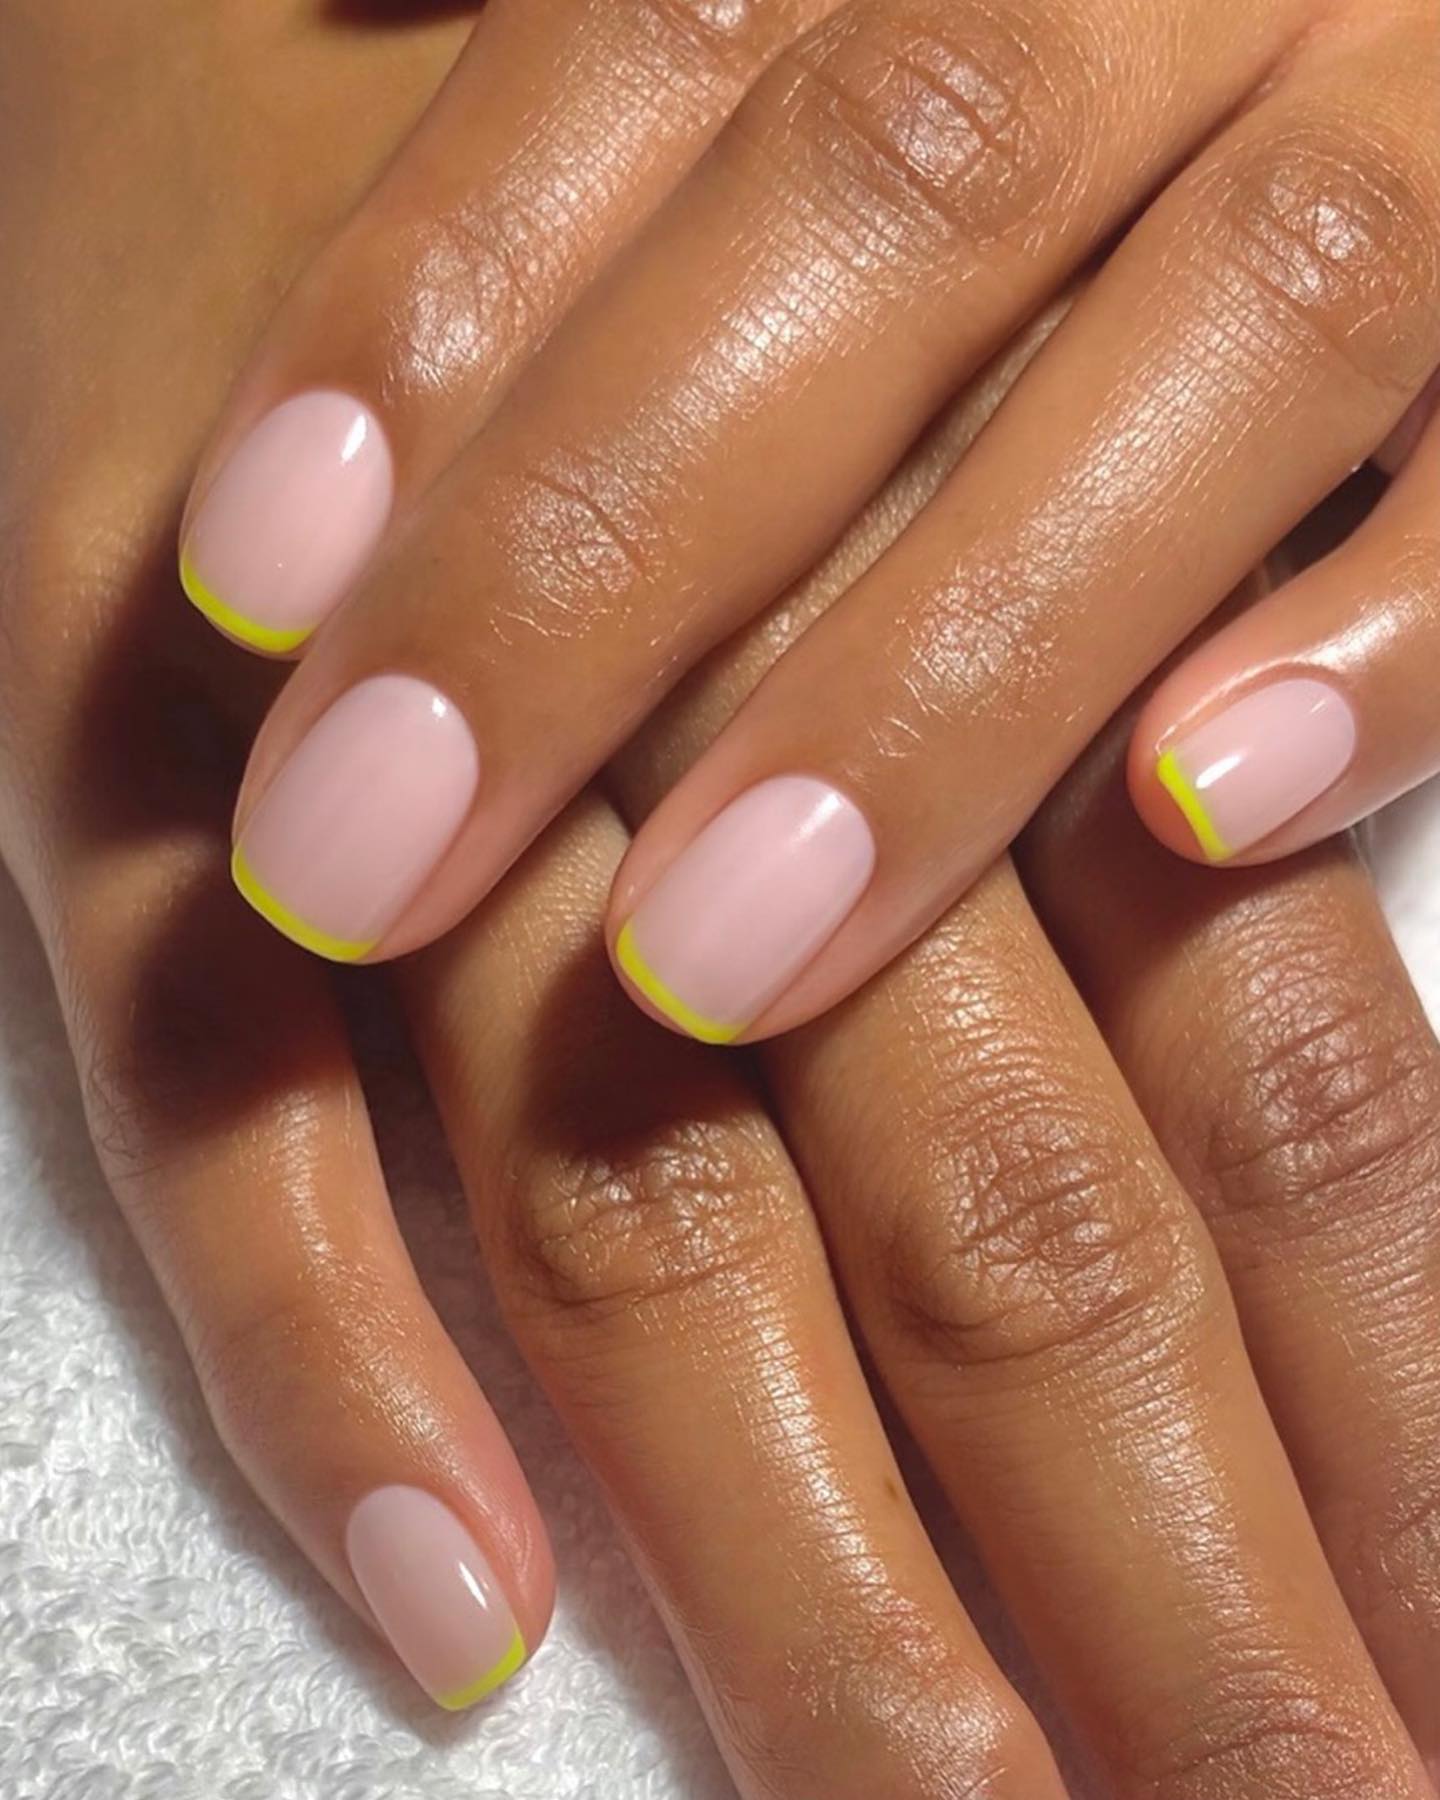 Short squoval nails with pastel yellow French tips